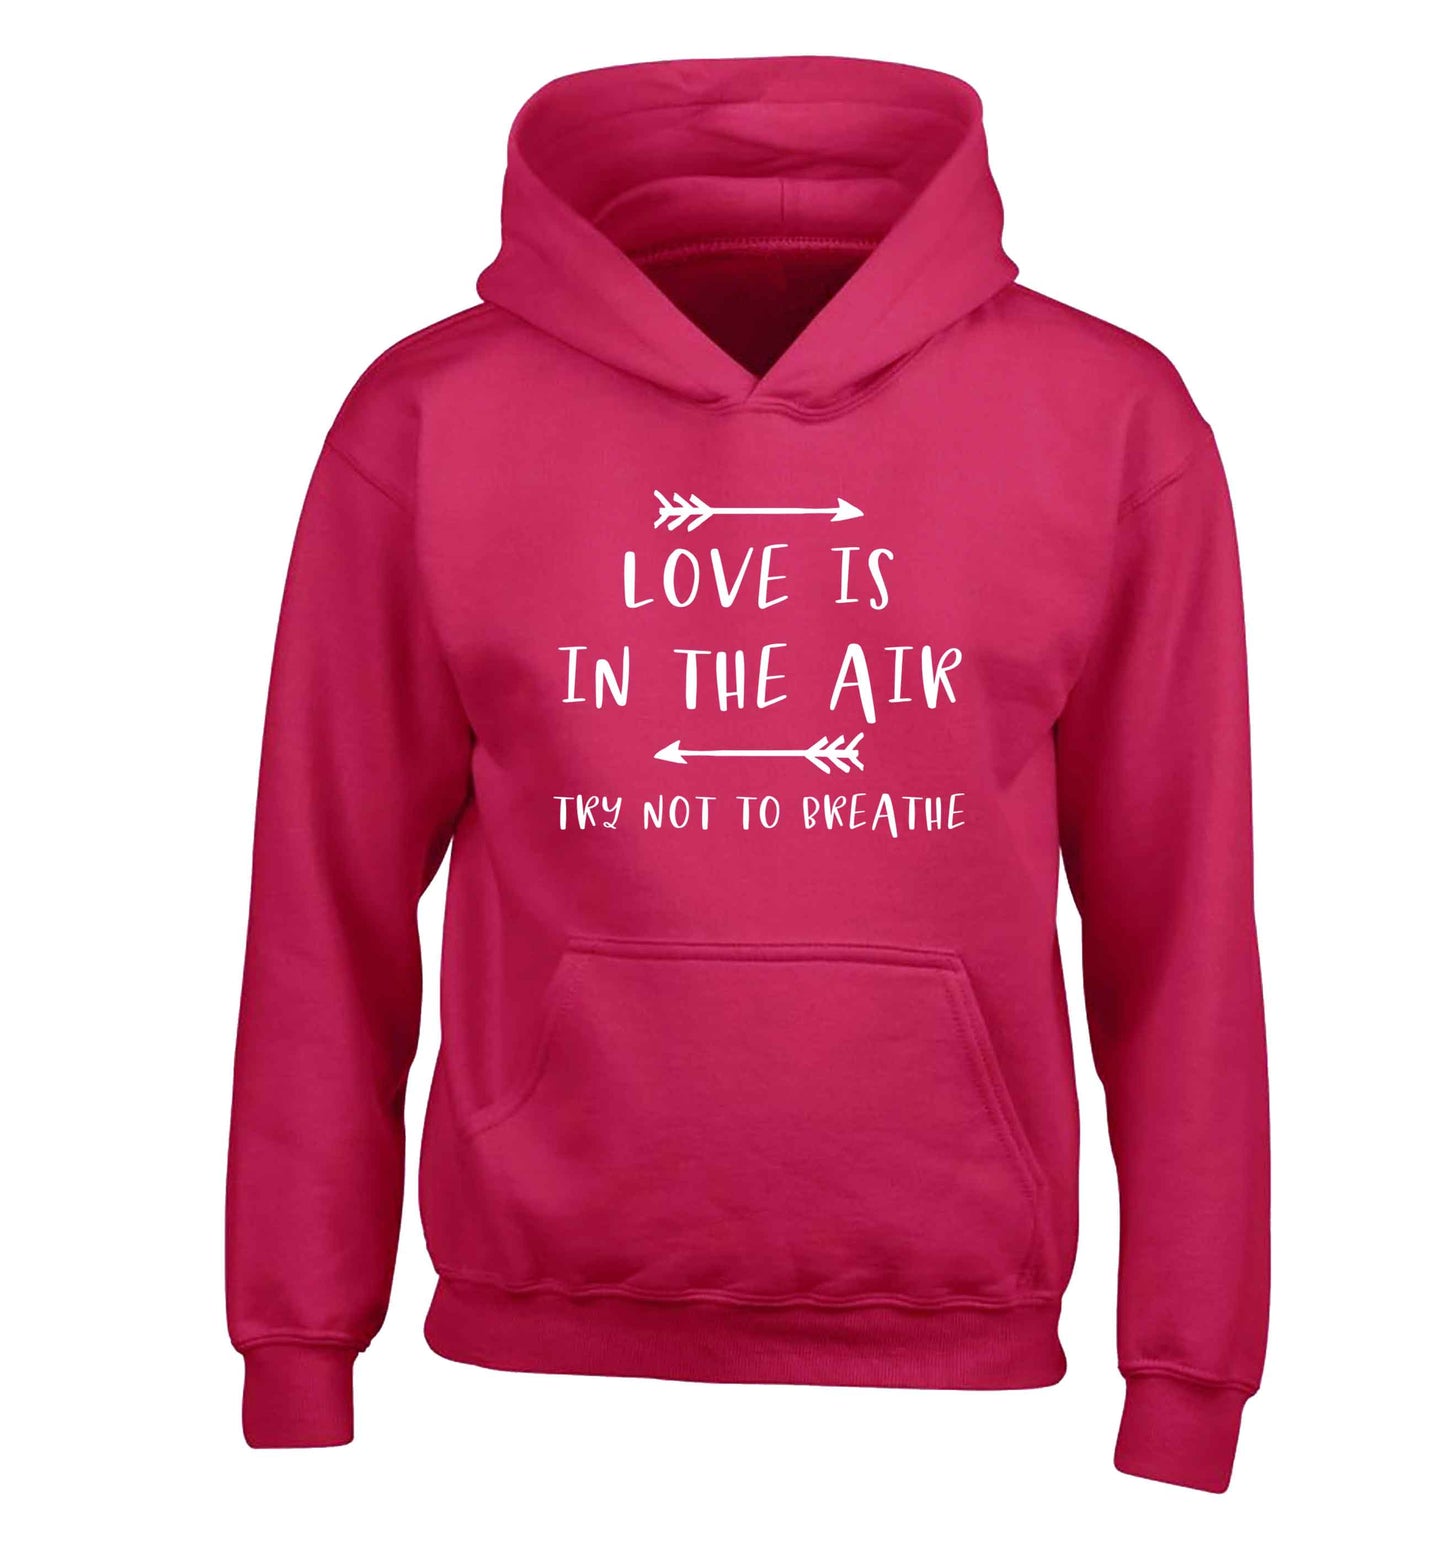 Love is in the air try not to breathe children's pink hoodie 12-13 Years